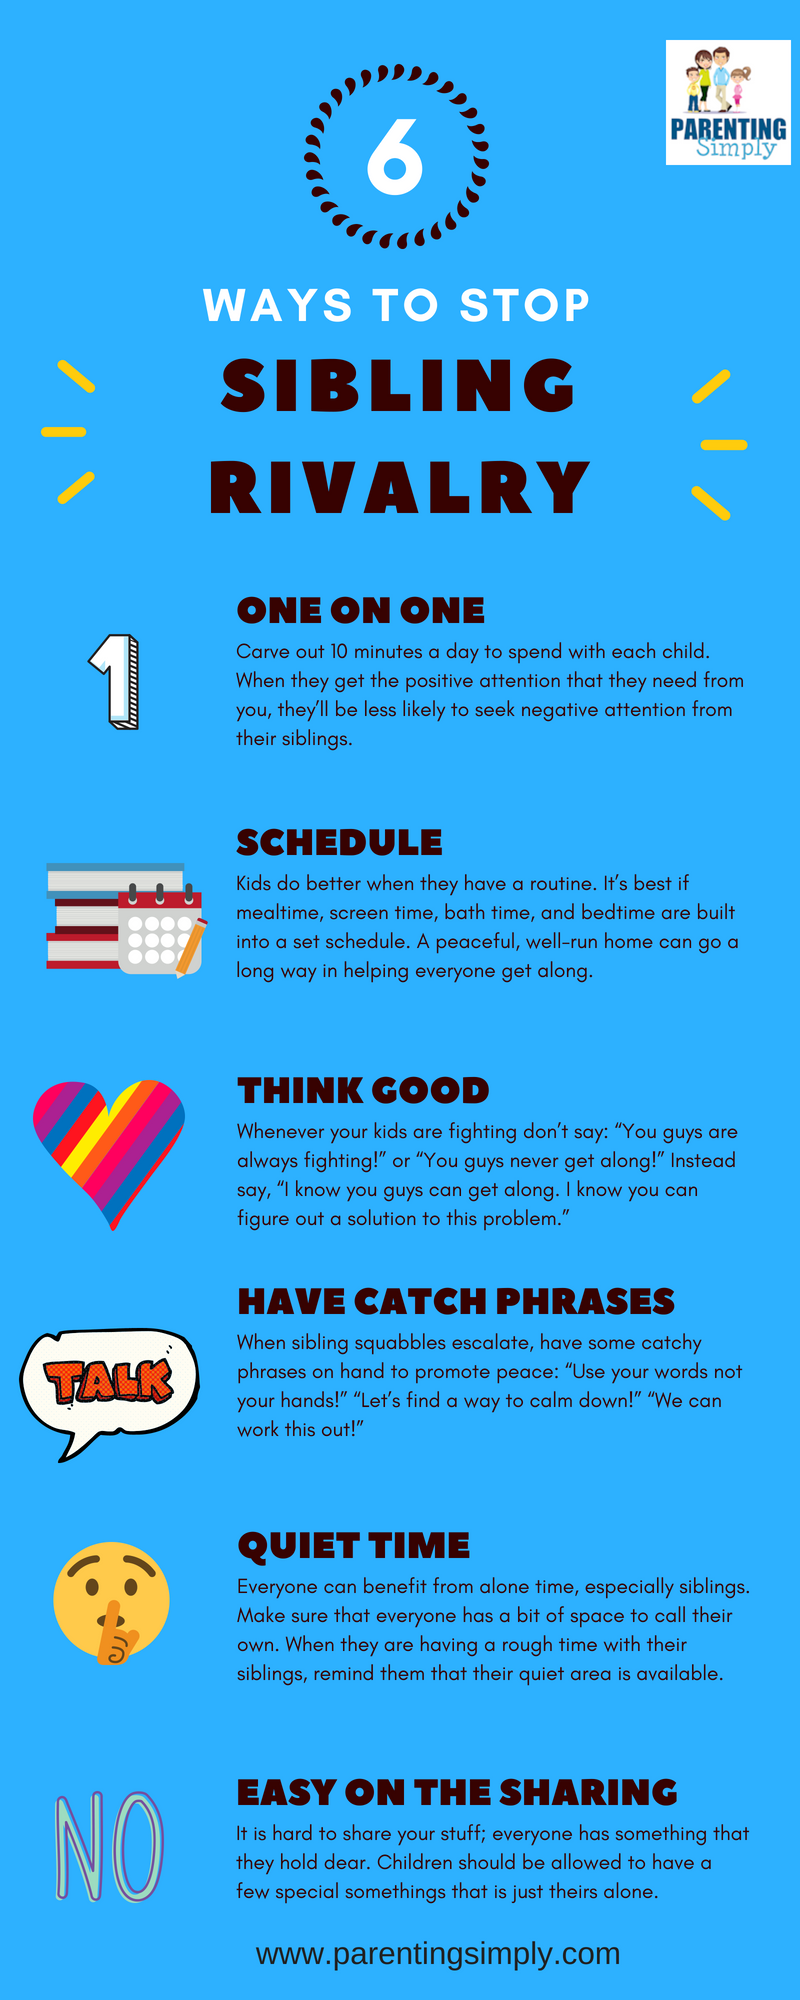 INFOGRAPHIC: Ways to Stop Sibling Rivalry